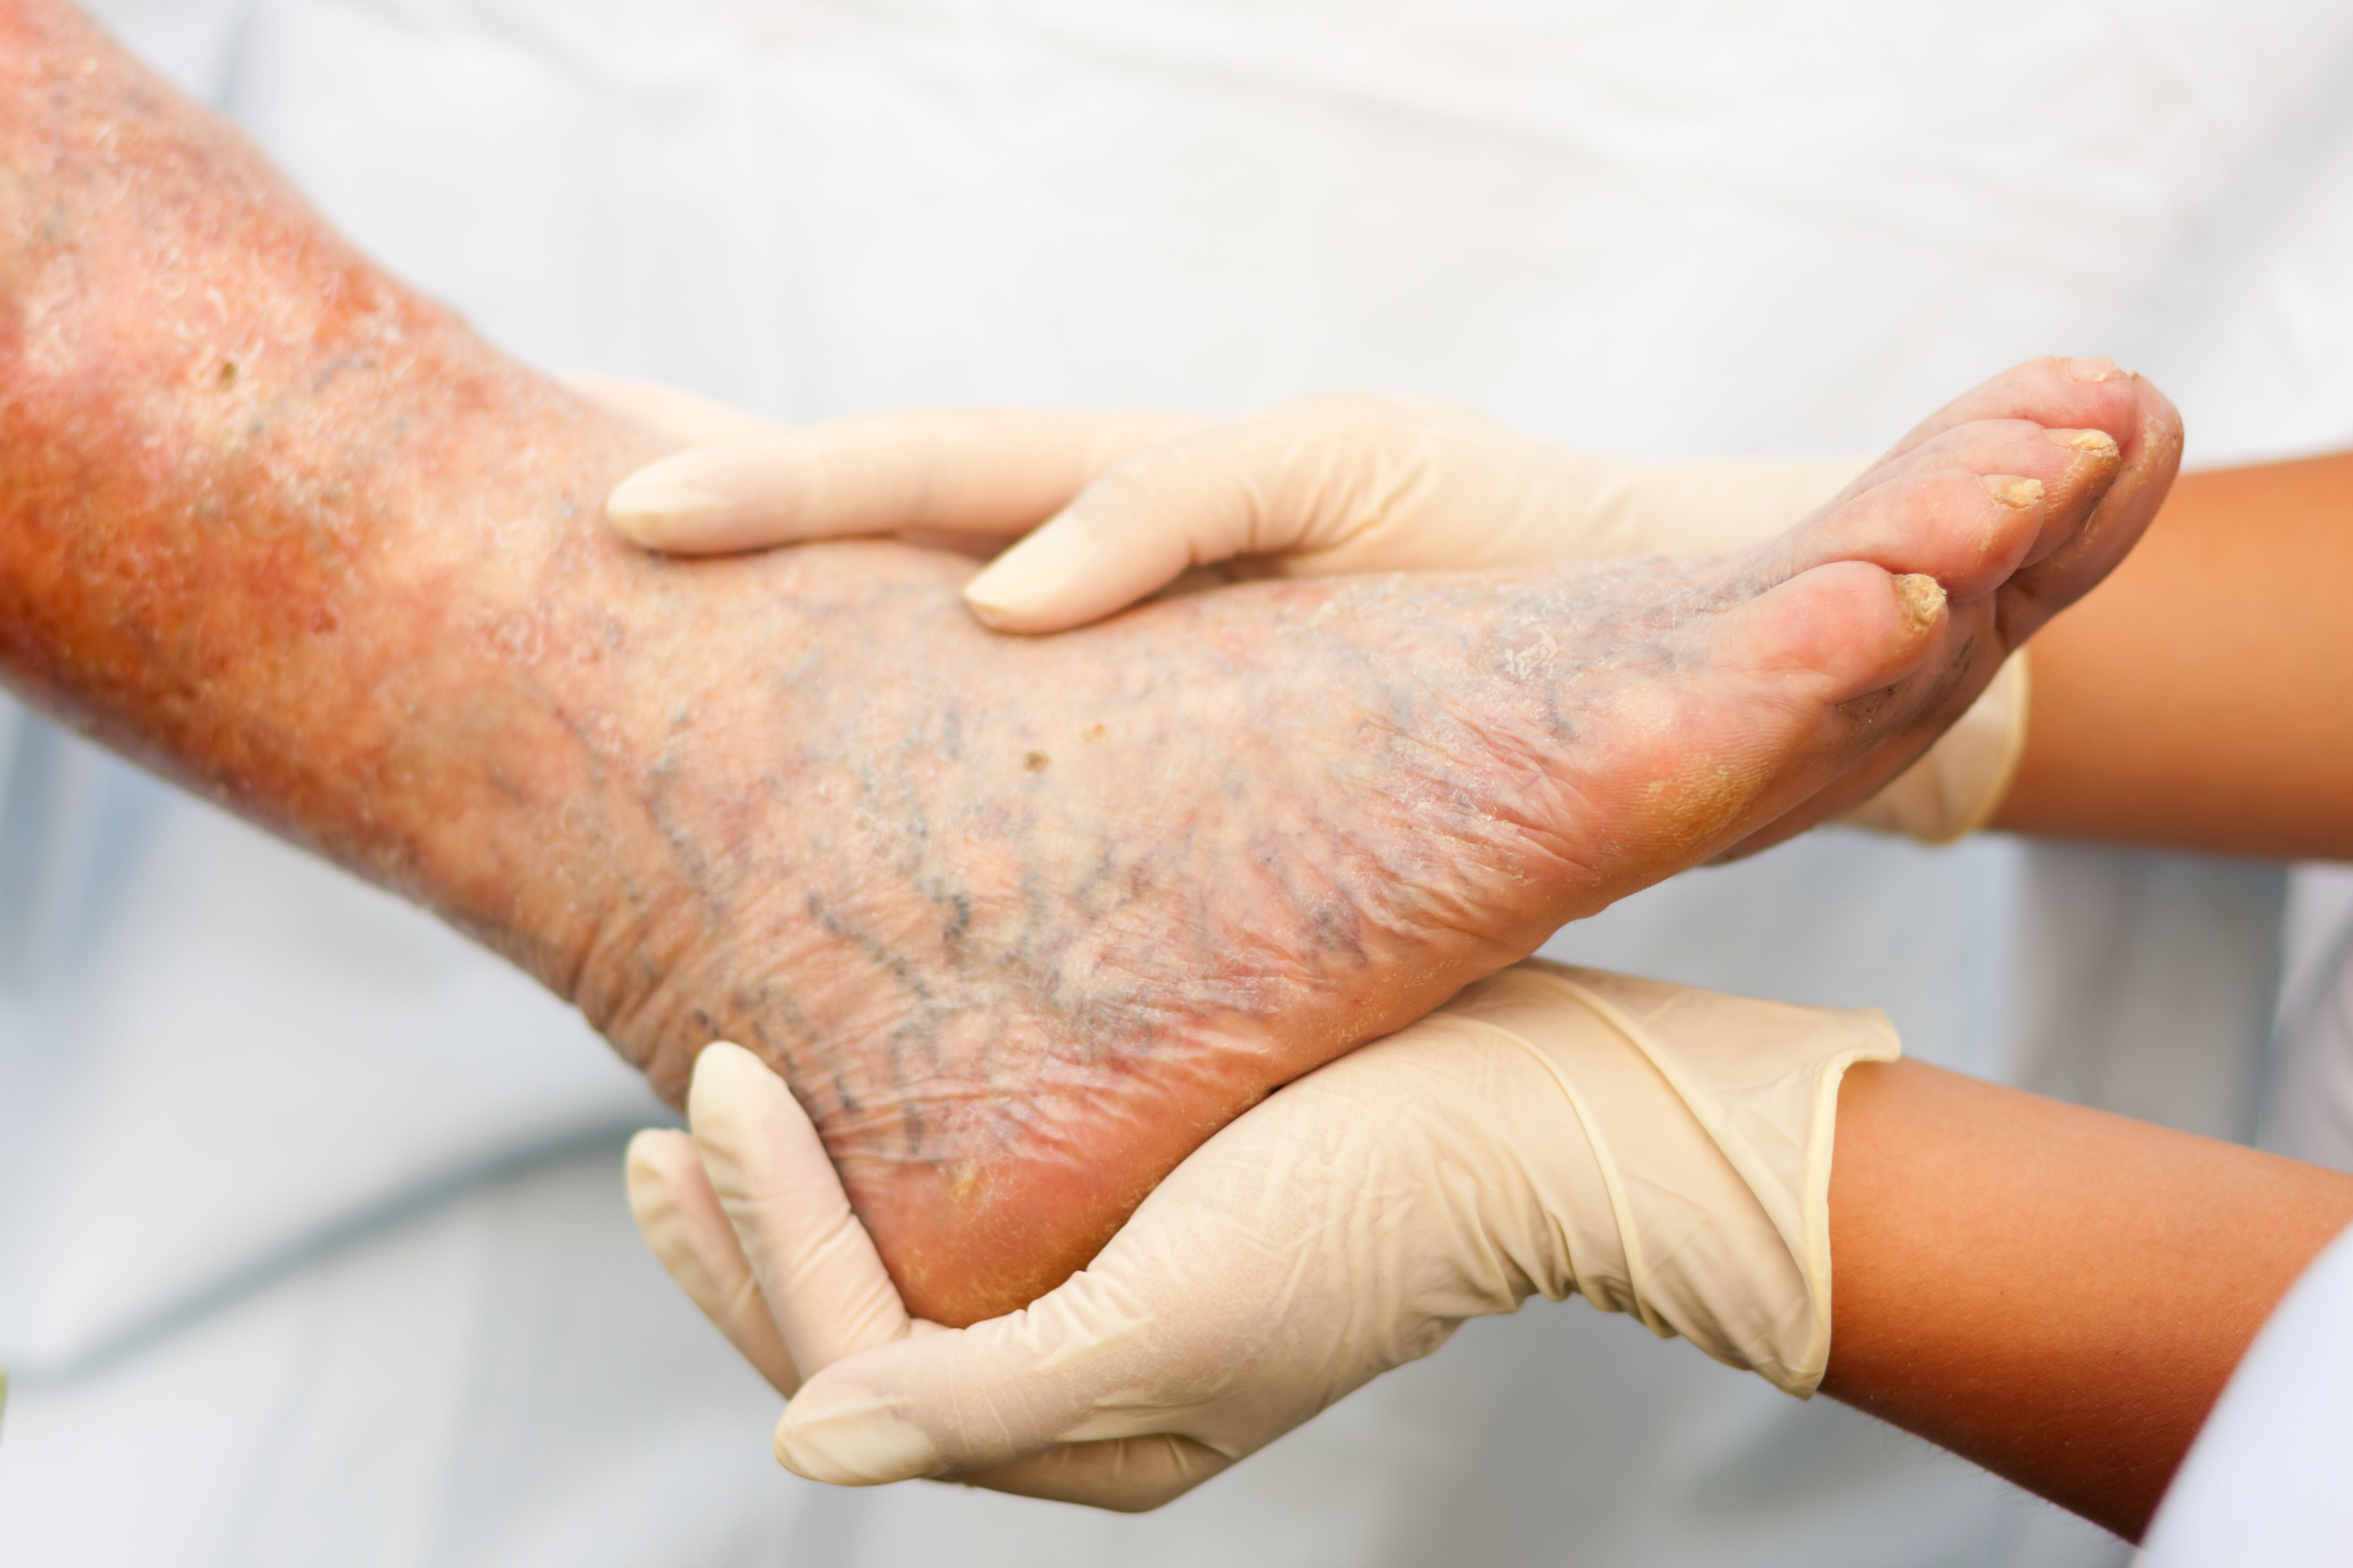 A Morristown, NJ Vascular Doctor Describes Unexpected Consequences of Swollen Legs and Ankles